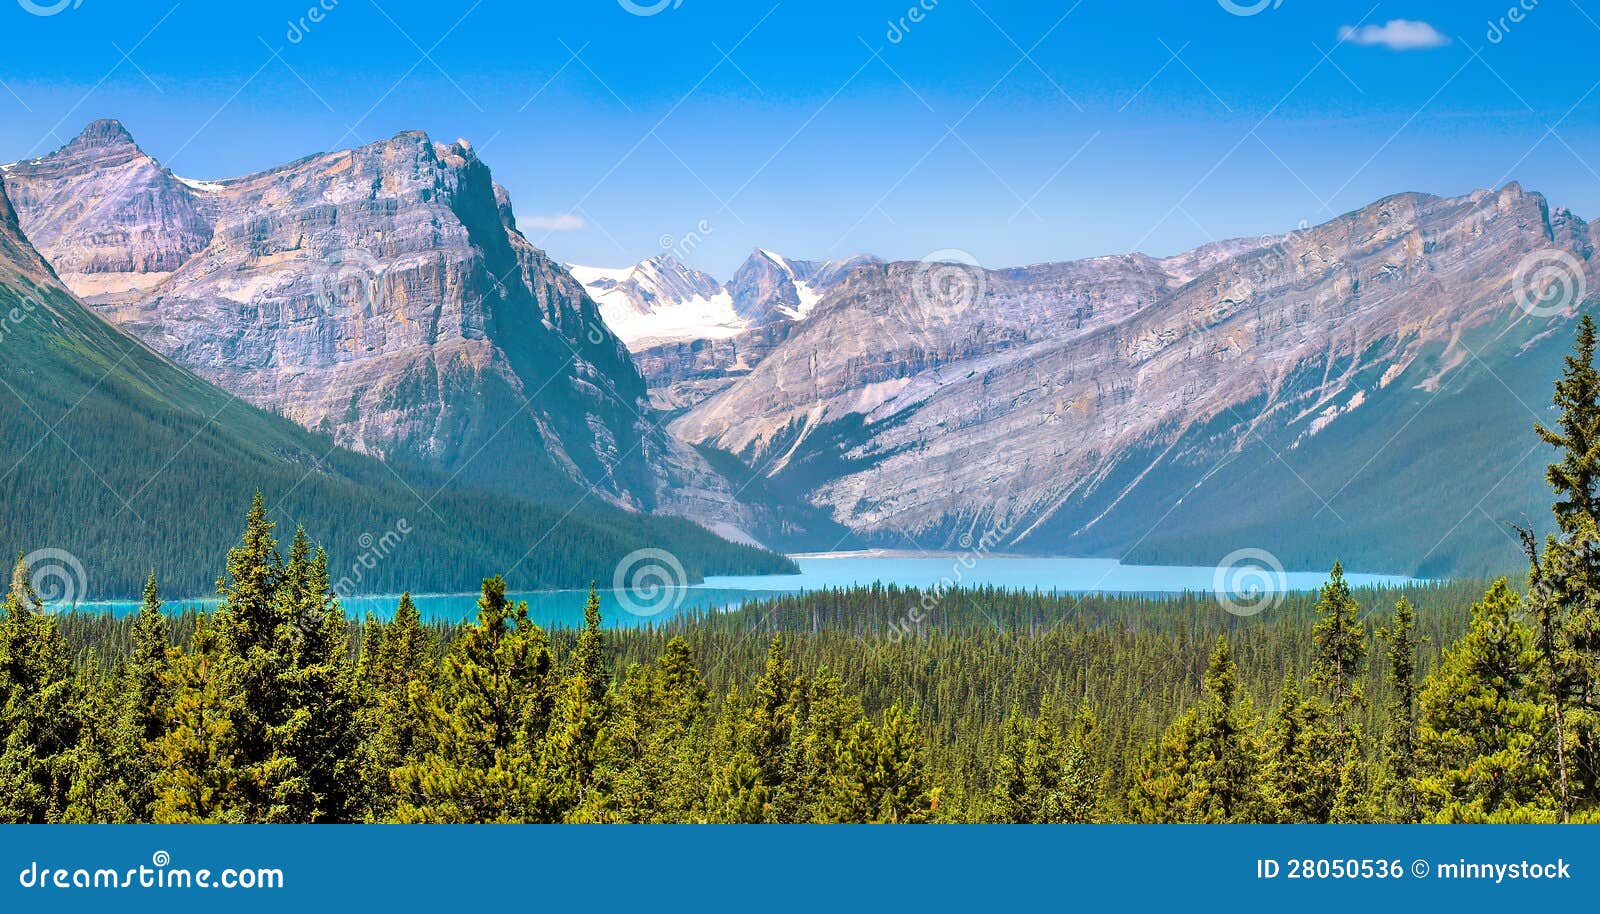 landscape with rocky mountains in alberta, canada